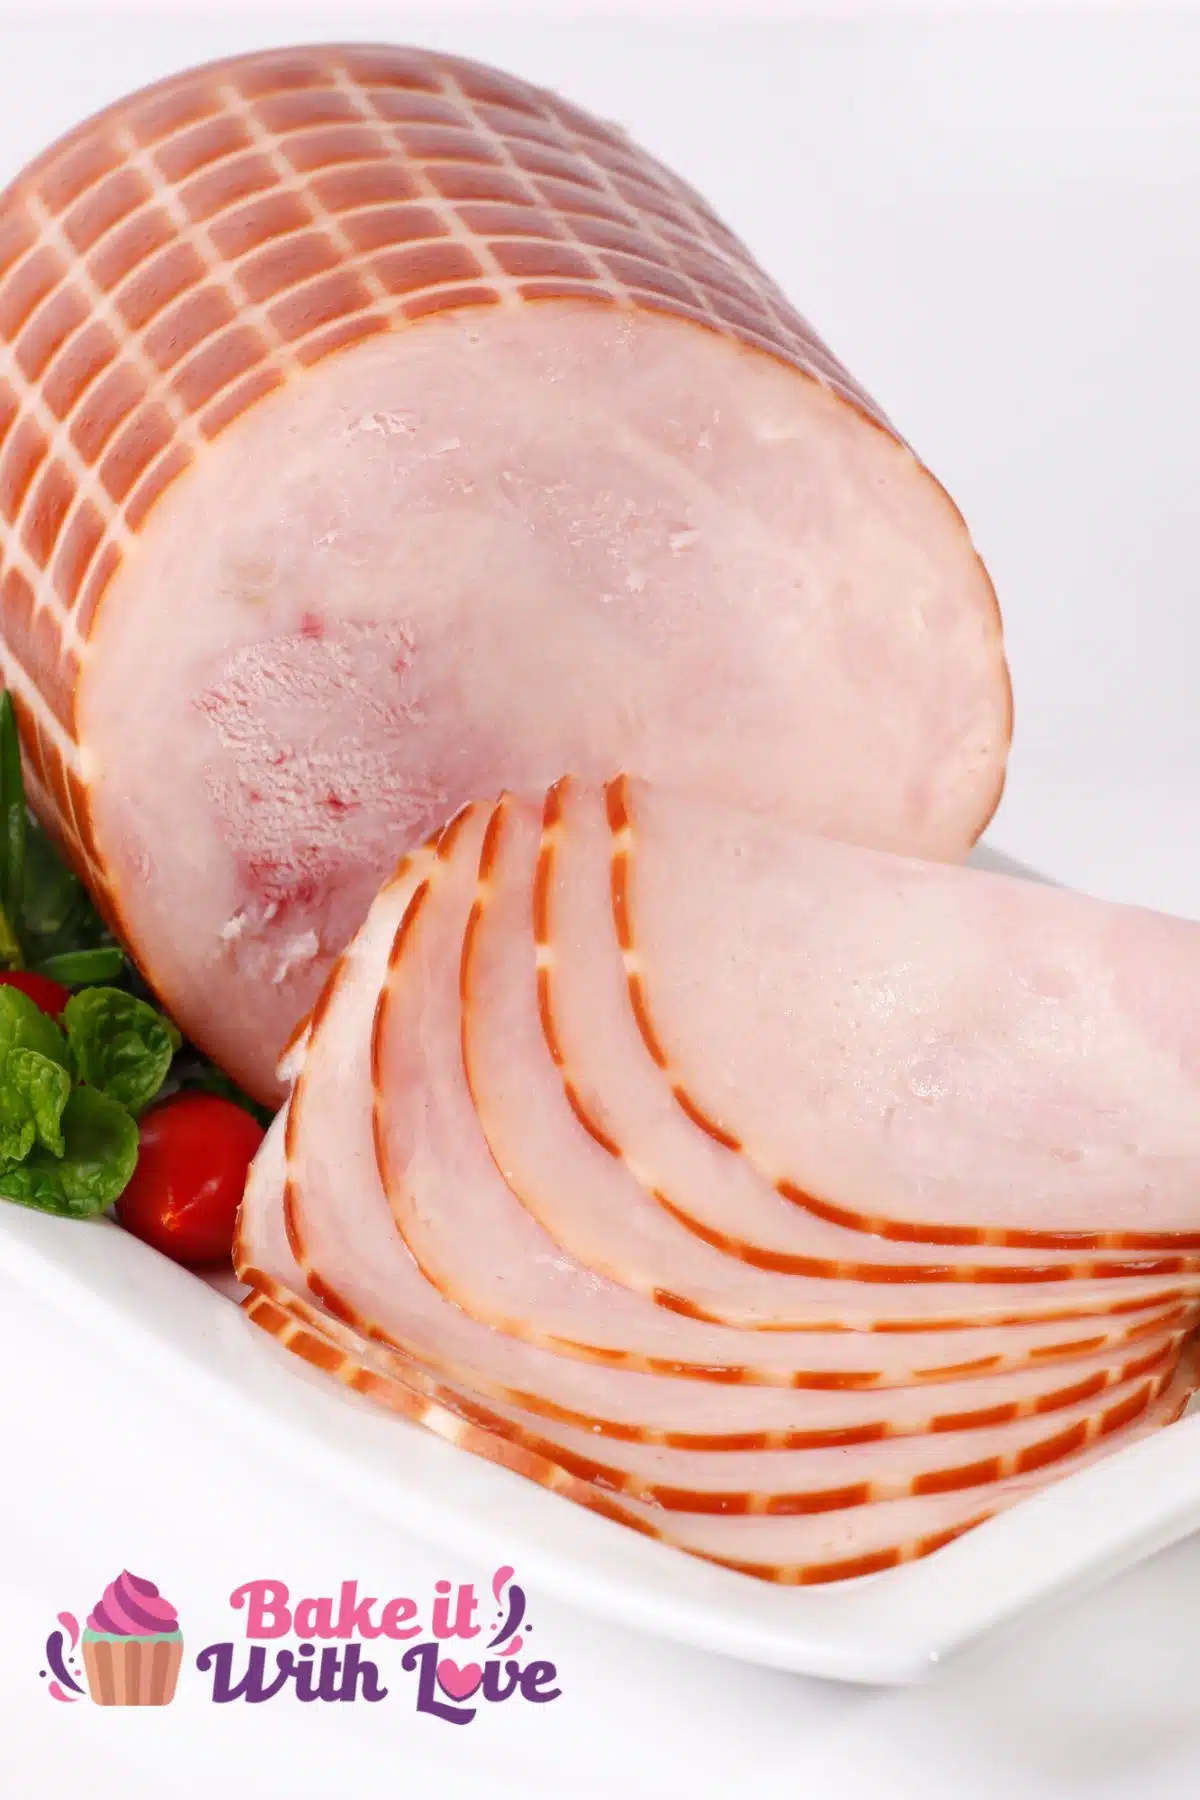 Tall image of a ham on a white background.